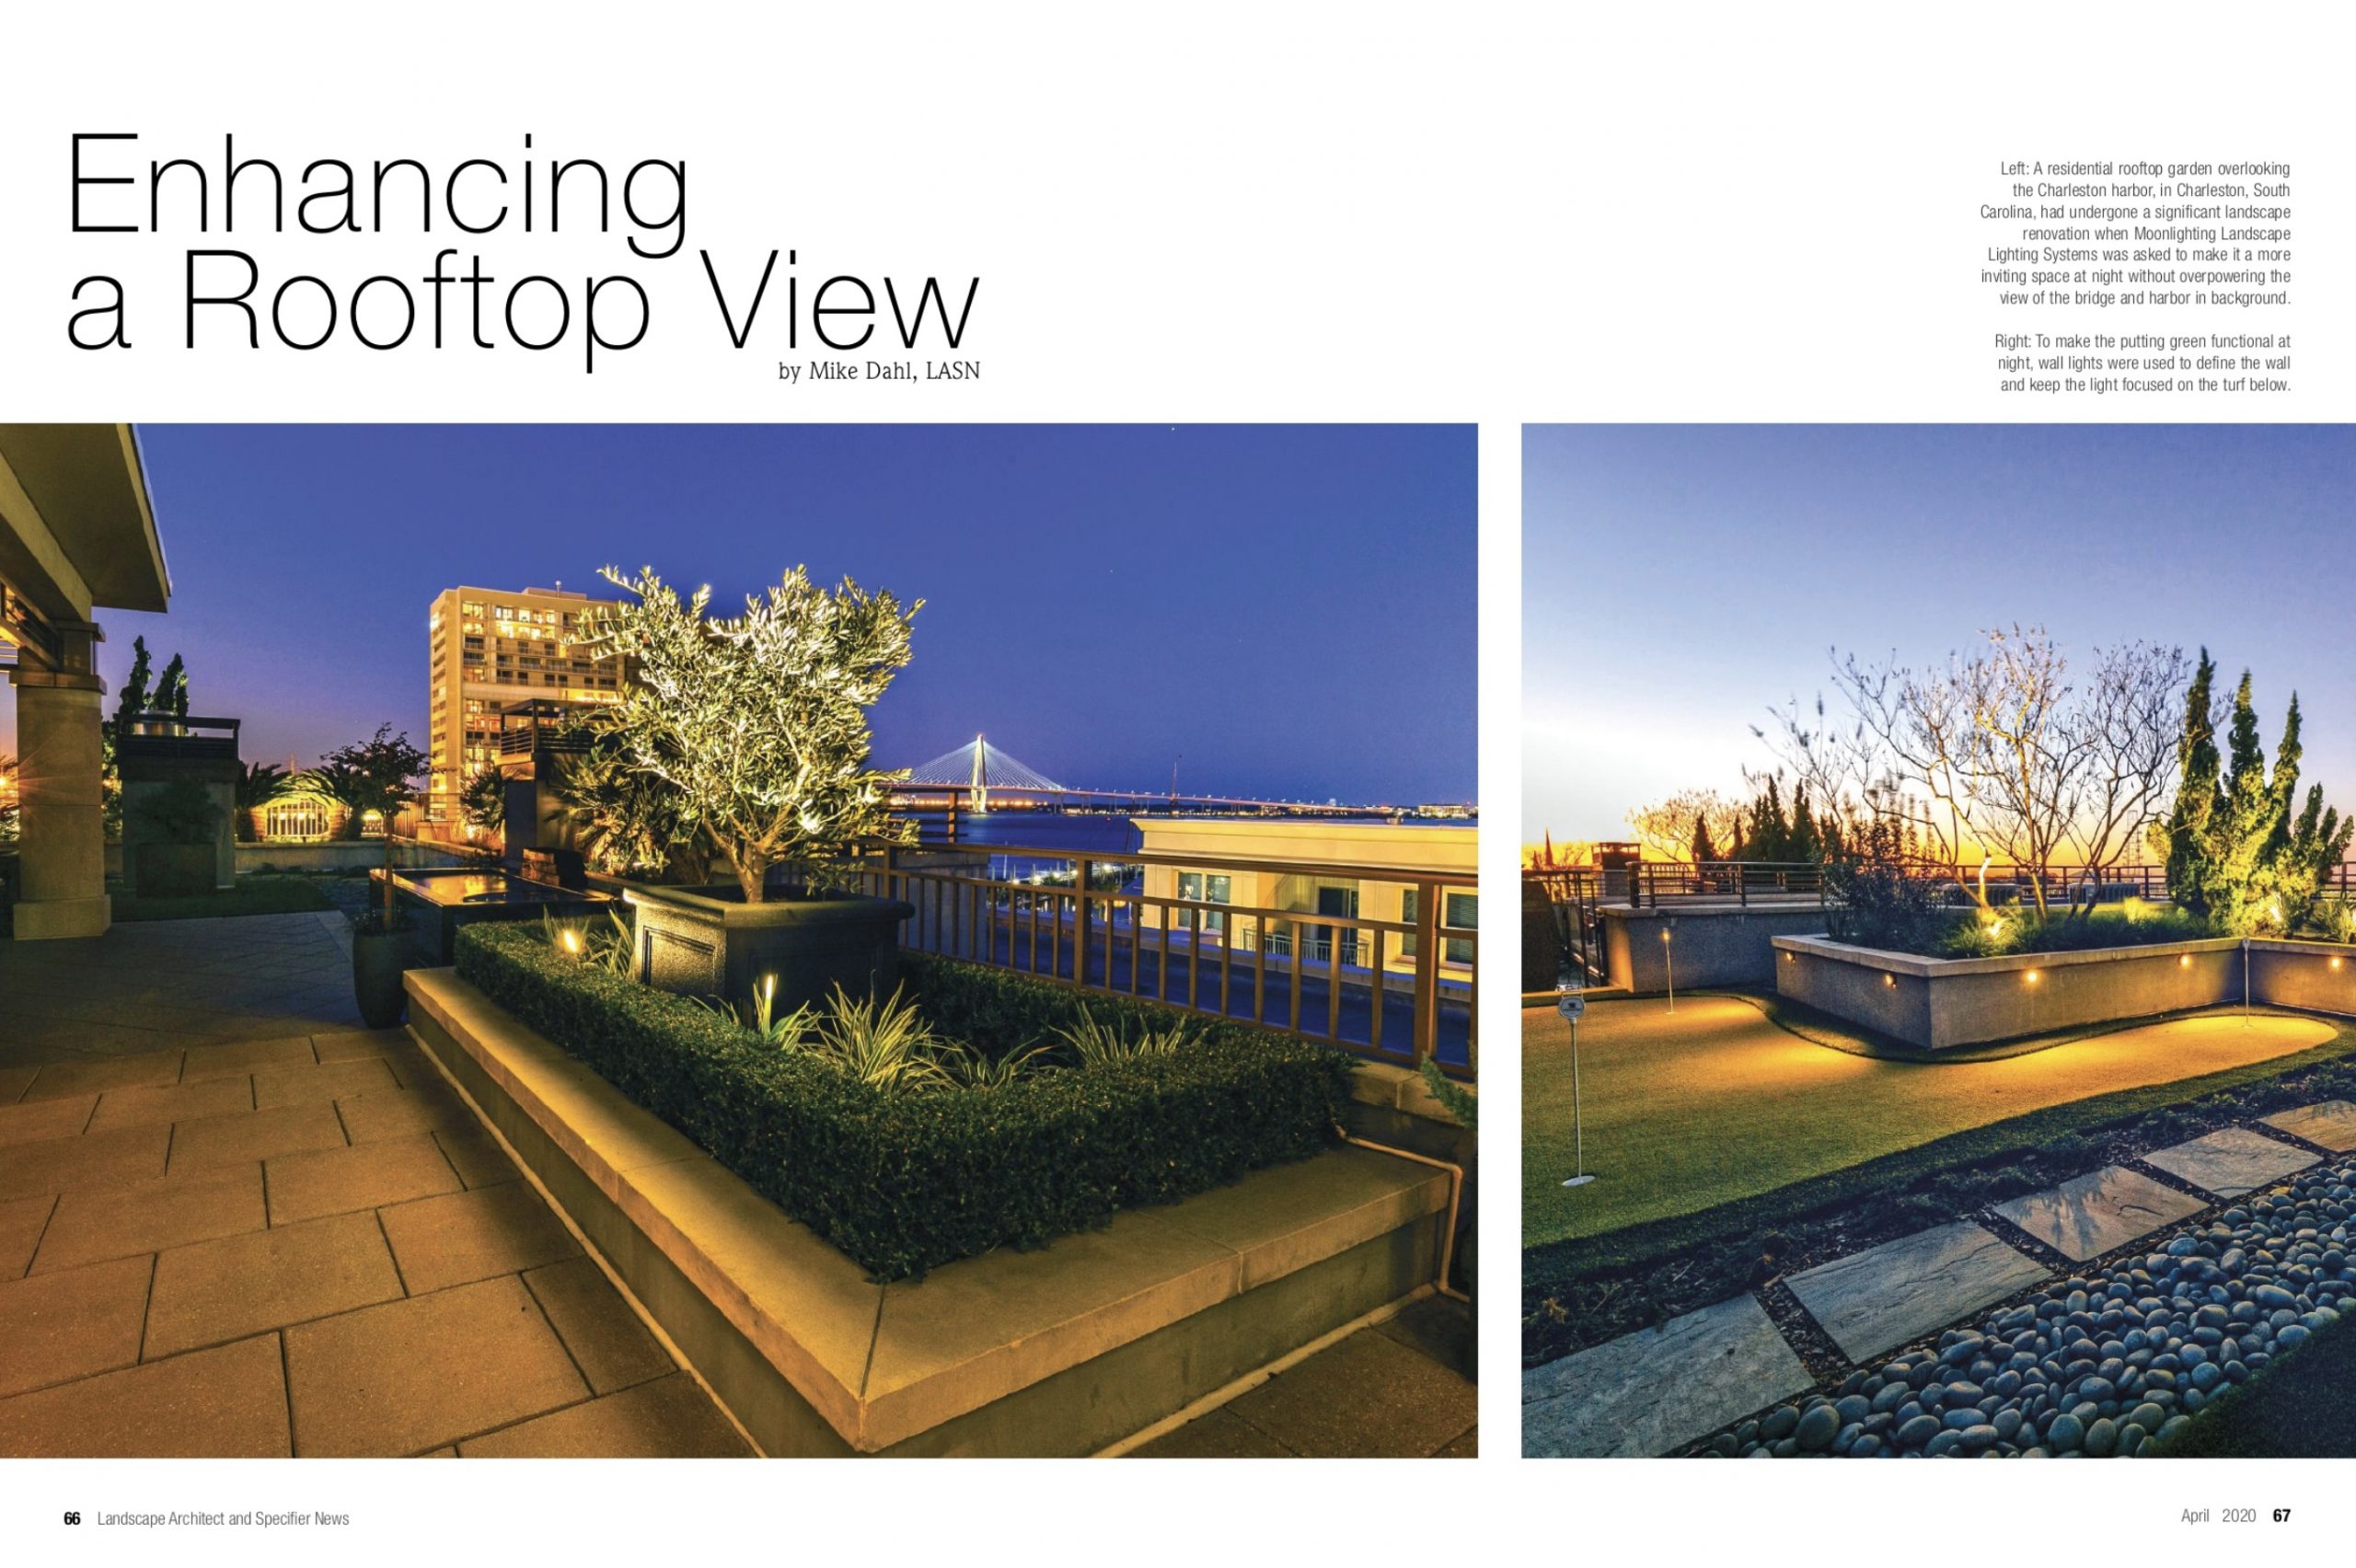 Moonlighting Featured In Landscape Architect And Specifier News